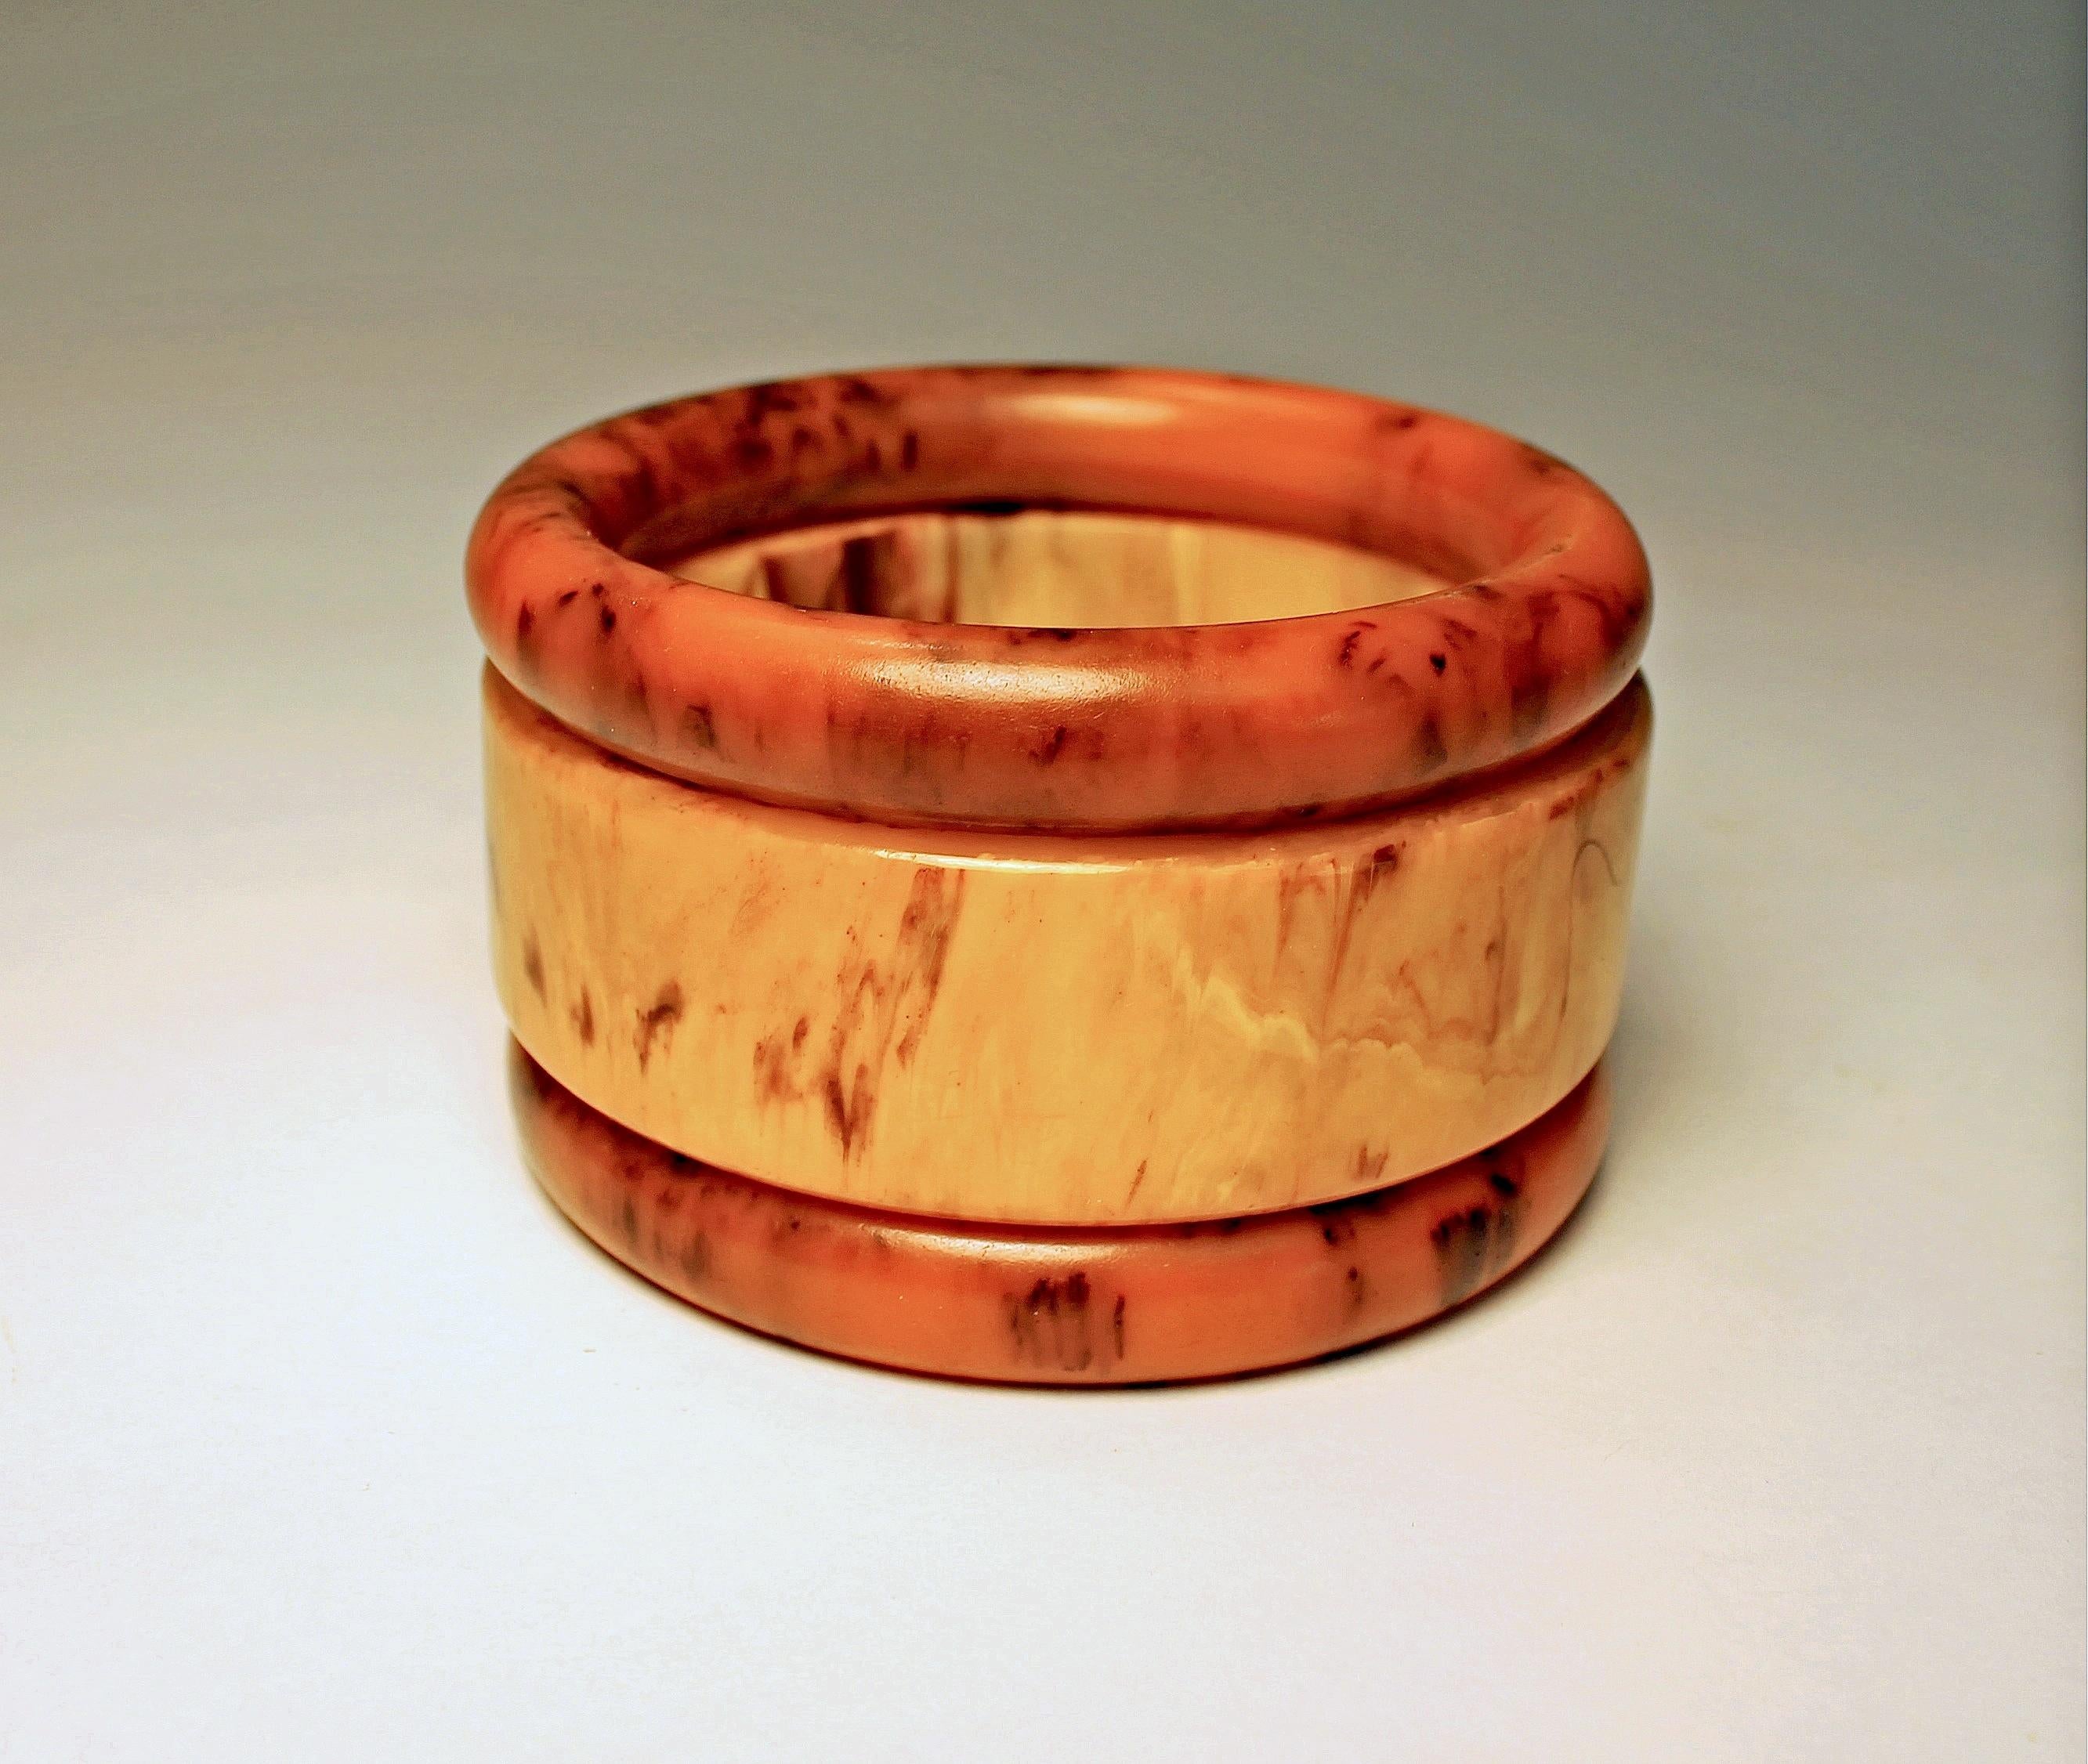 Bakelite Cuff Bangles in Butterscotch and Cinnabar For Sale 2